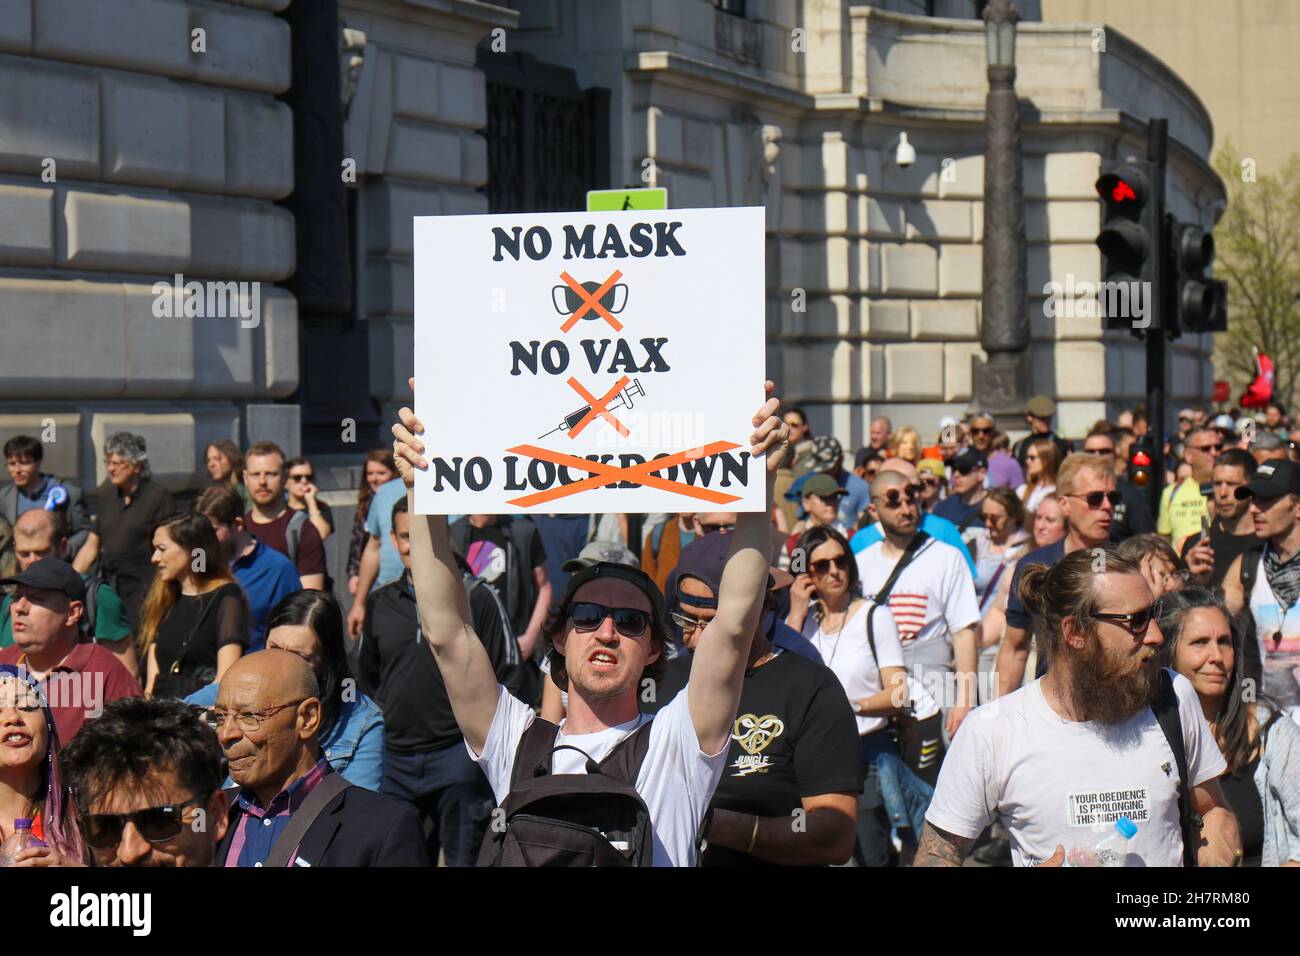 Man Holds Sign with "No Mask, No Vax, No Lockdown" Stock Photo